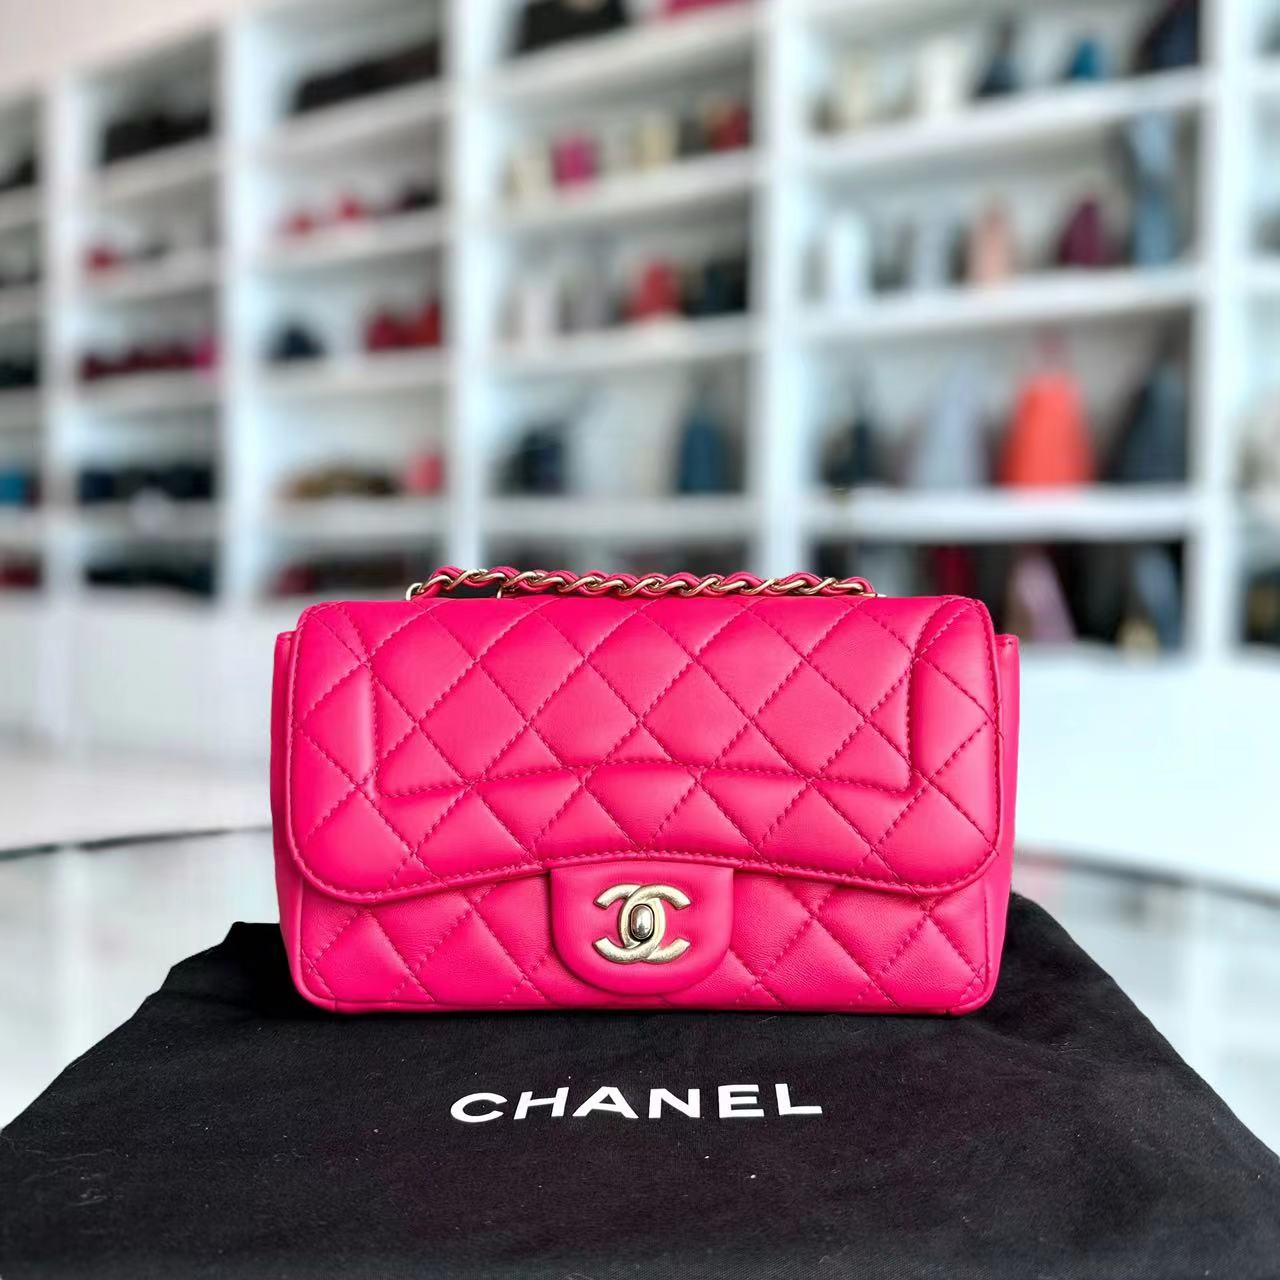 Chanel Mademoiselle Chic Seasonal Flap Mini Quilted Lambskin Hot Pink GHW No 21